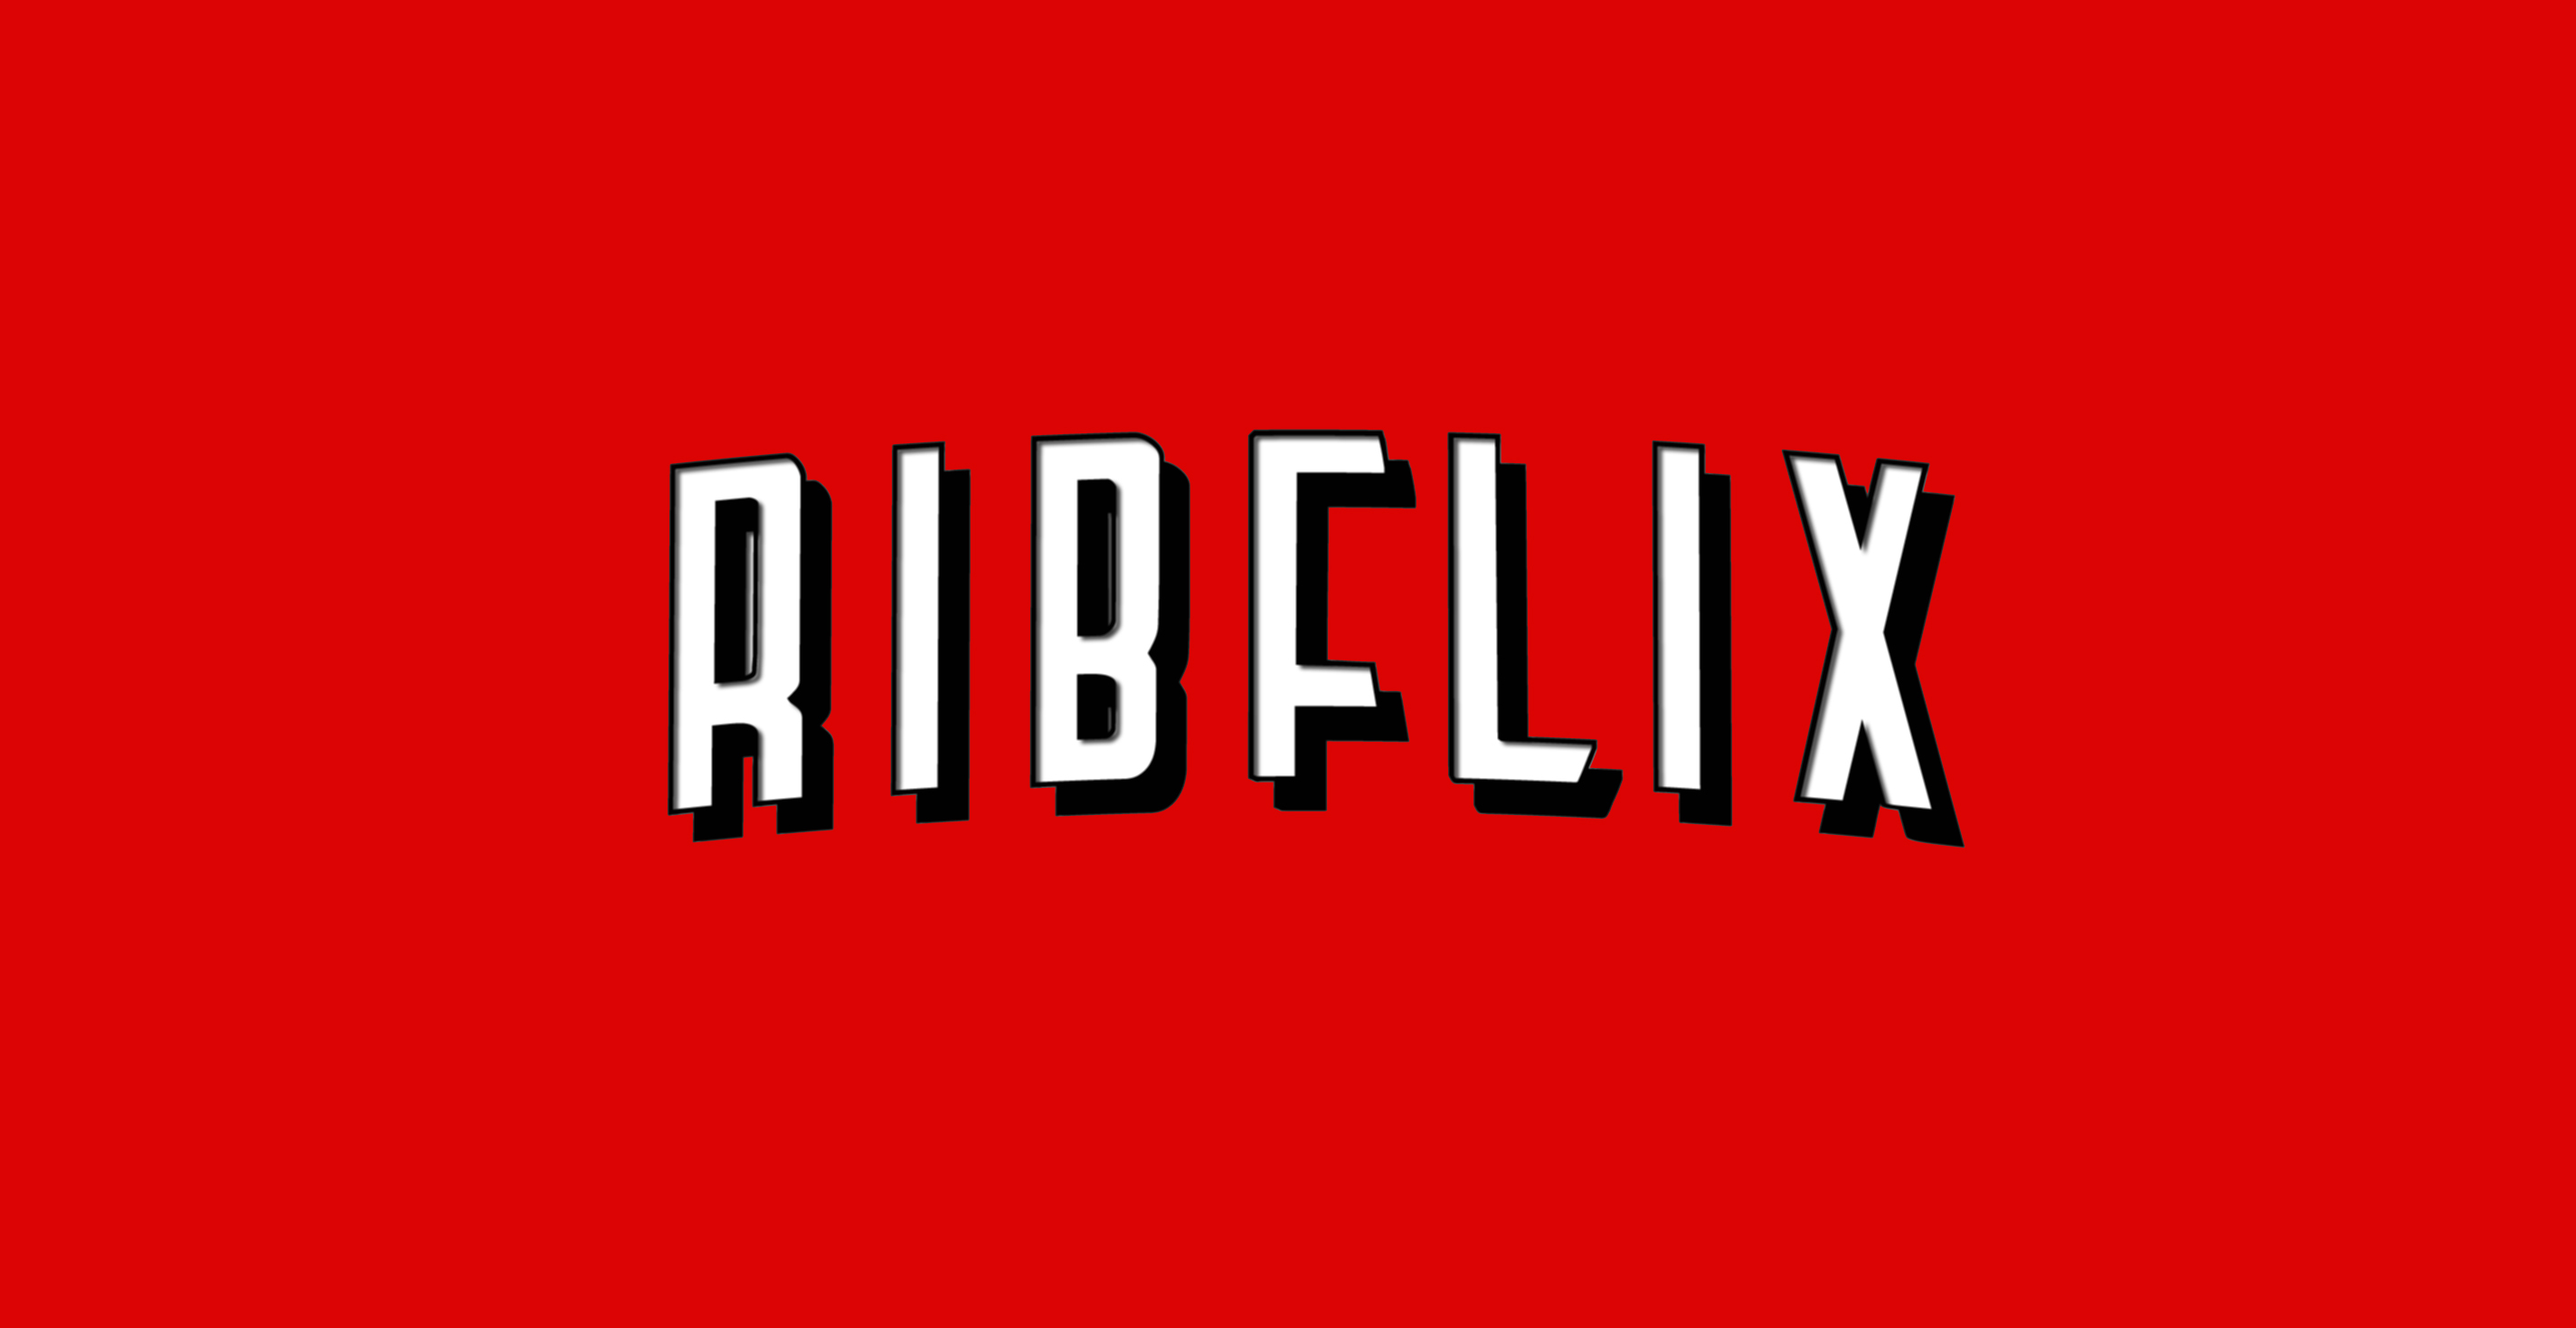 5 Things on Netflix to tell Mike You Binge-Watched